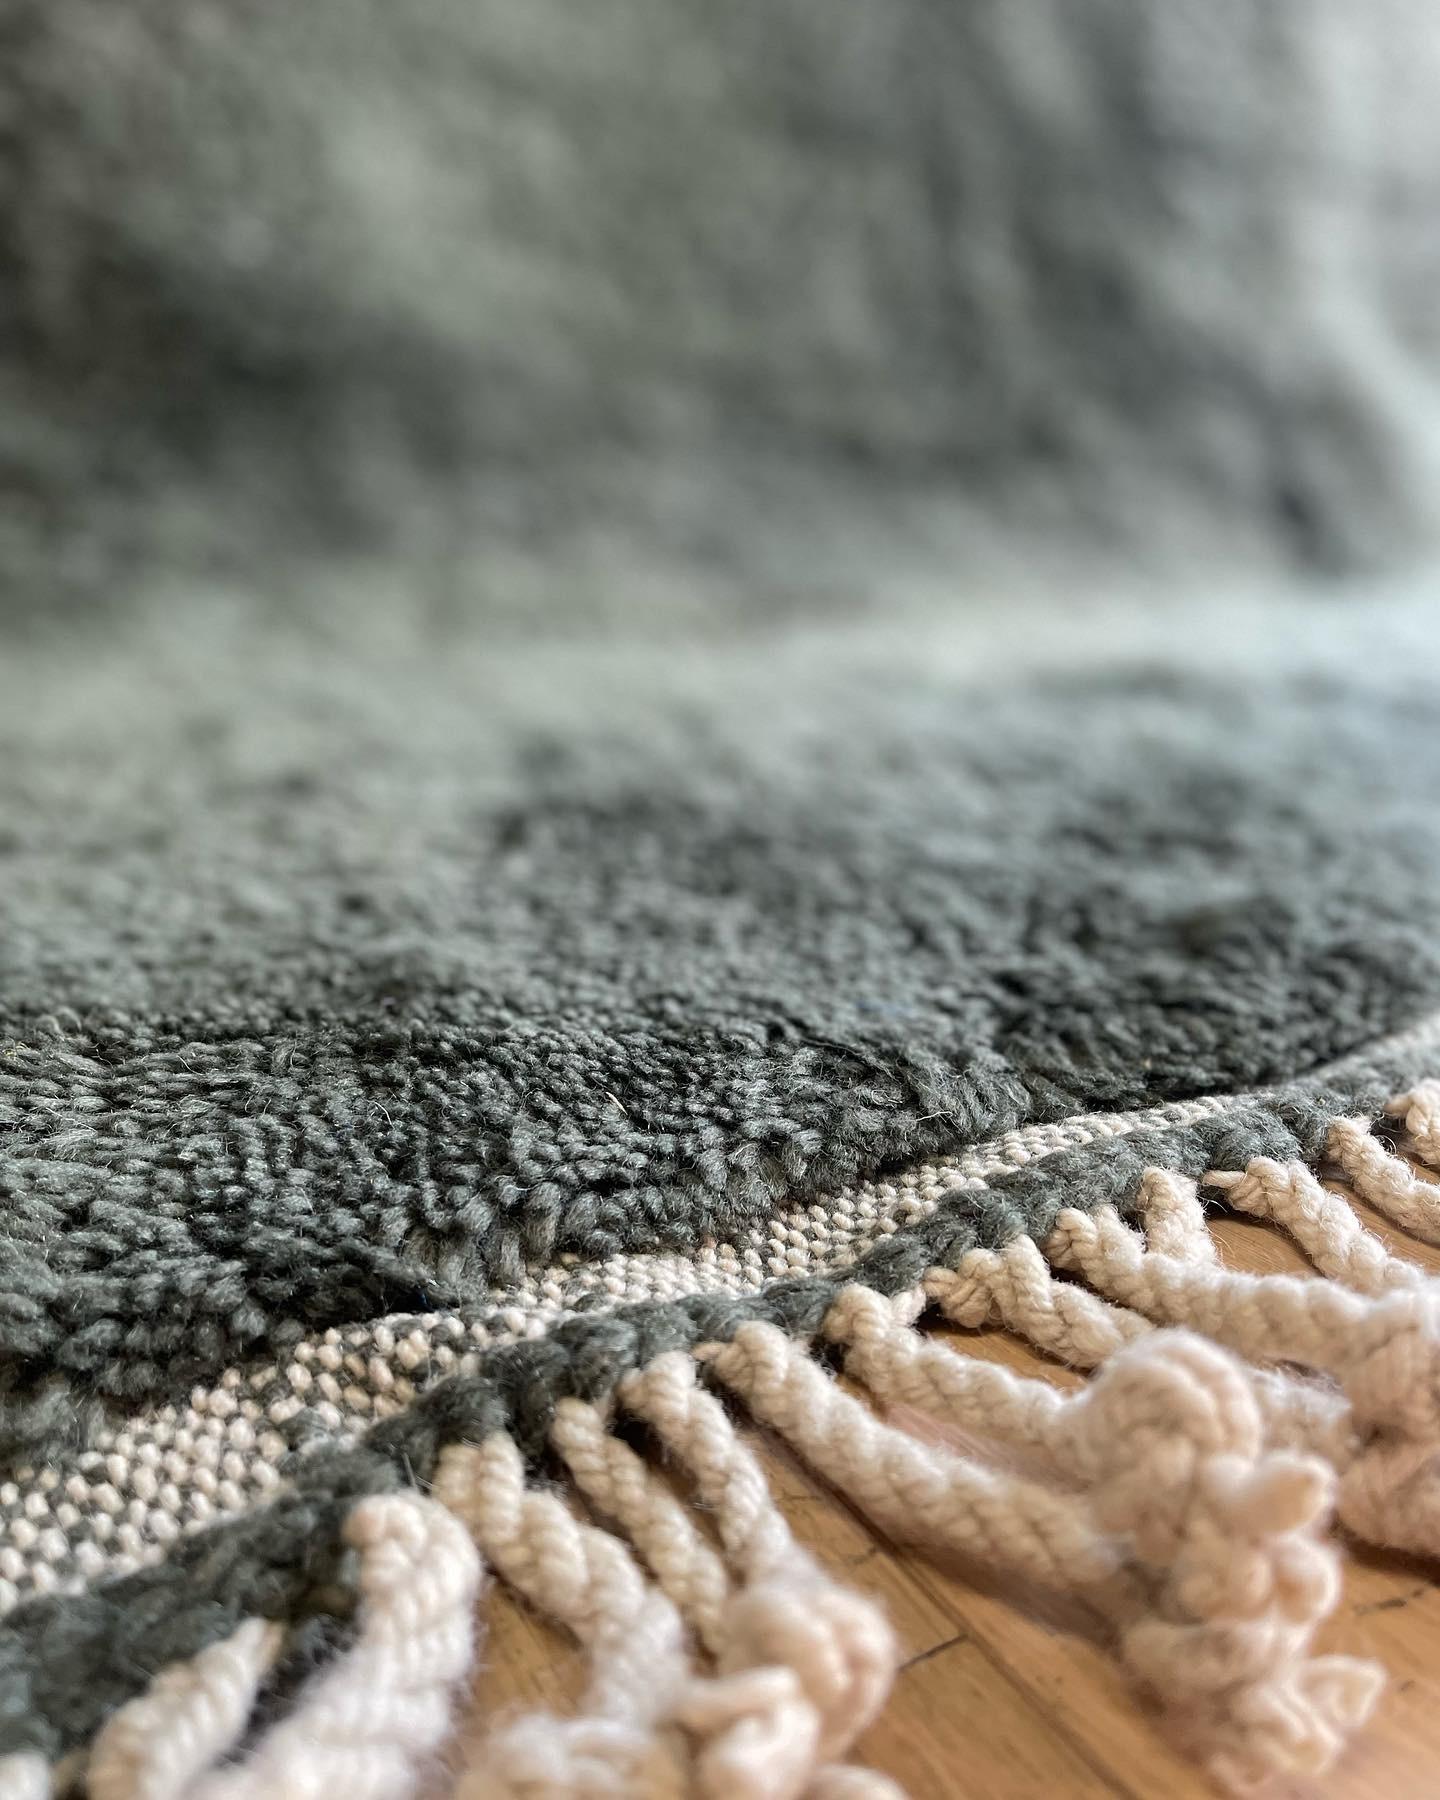 Every rug owns its unique identity.
Having a one of a kind rug at home with a beautiful backstory represents a life filled with historic and meaningful backgrounds.
Each and every one of our rugs take long hours to complete with extreme attention